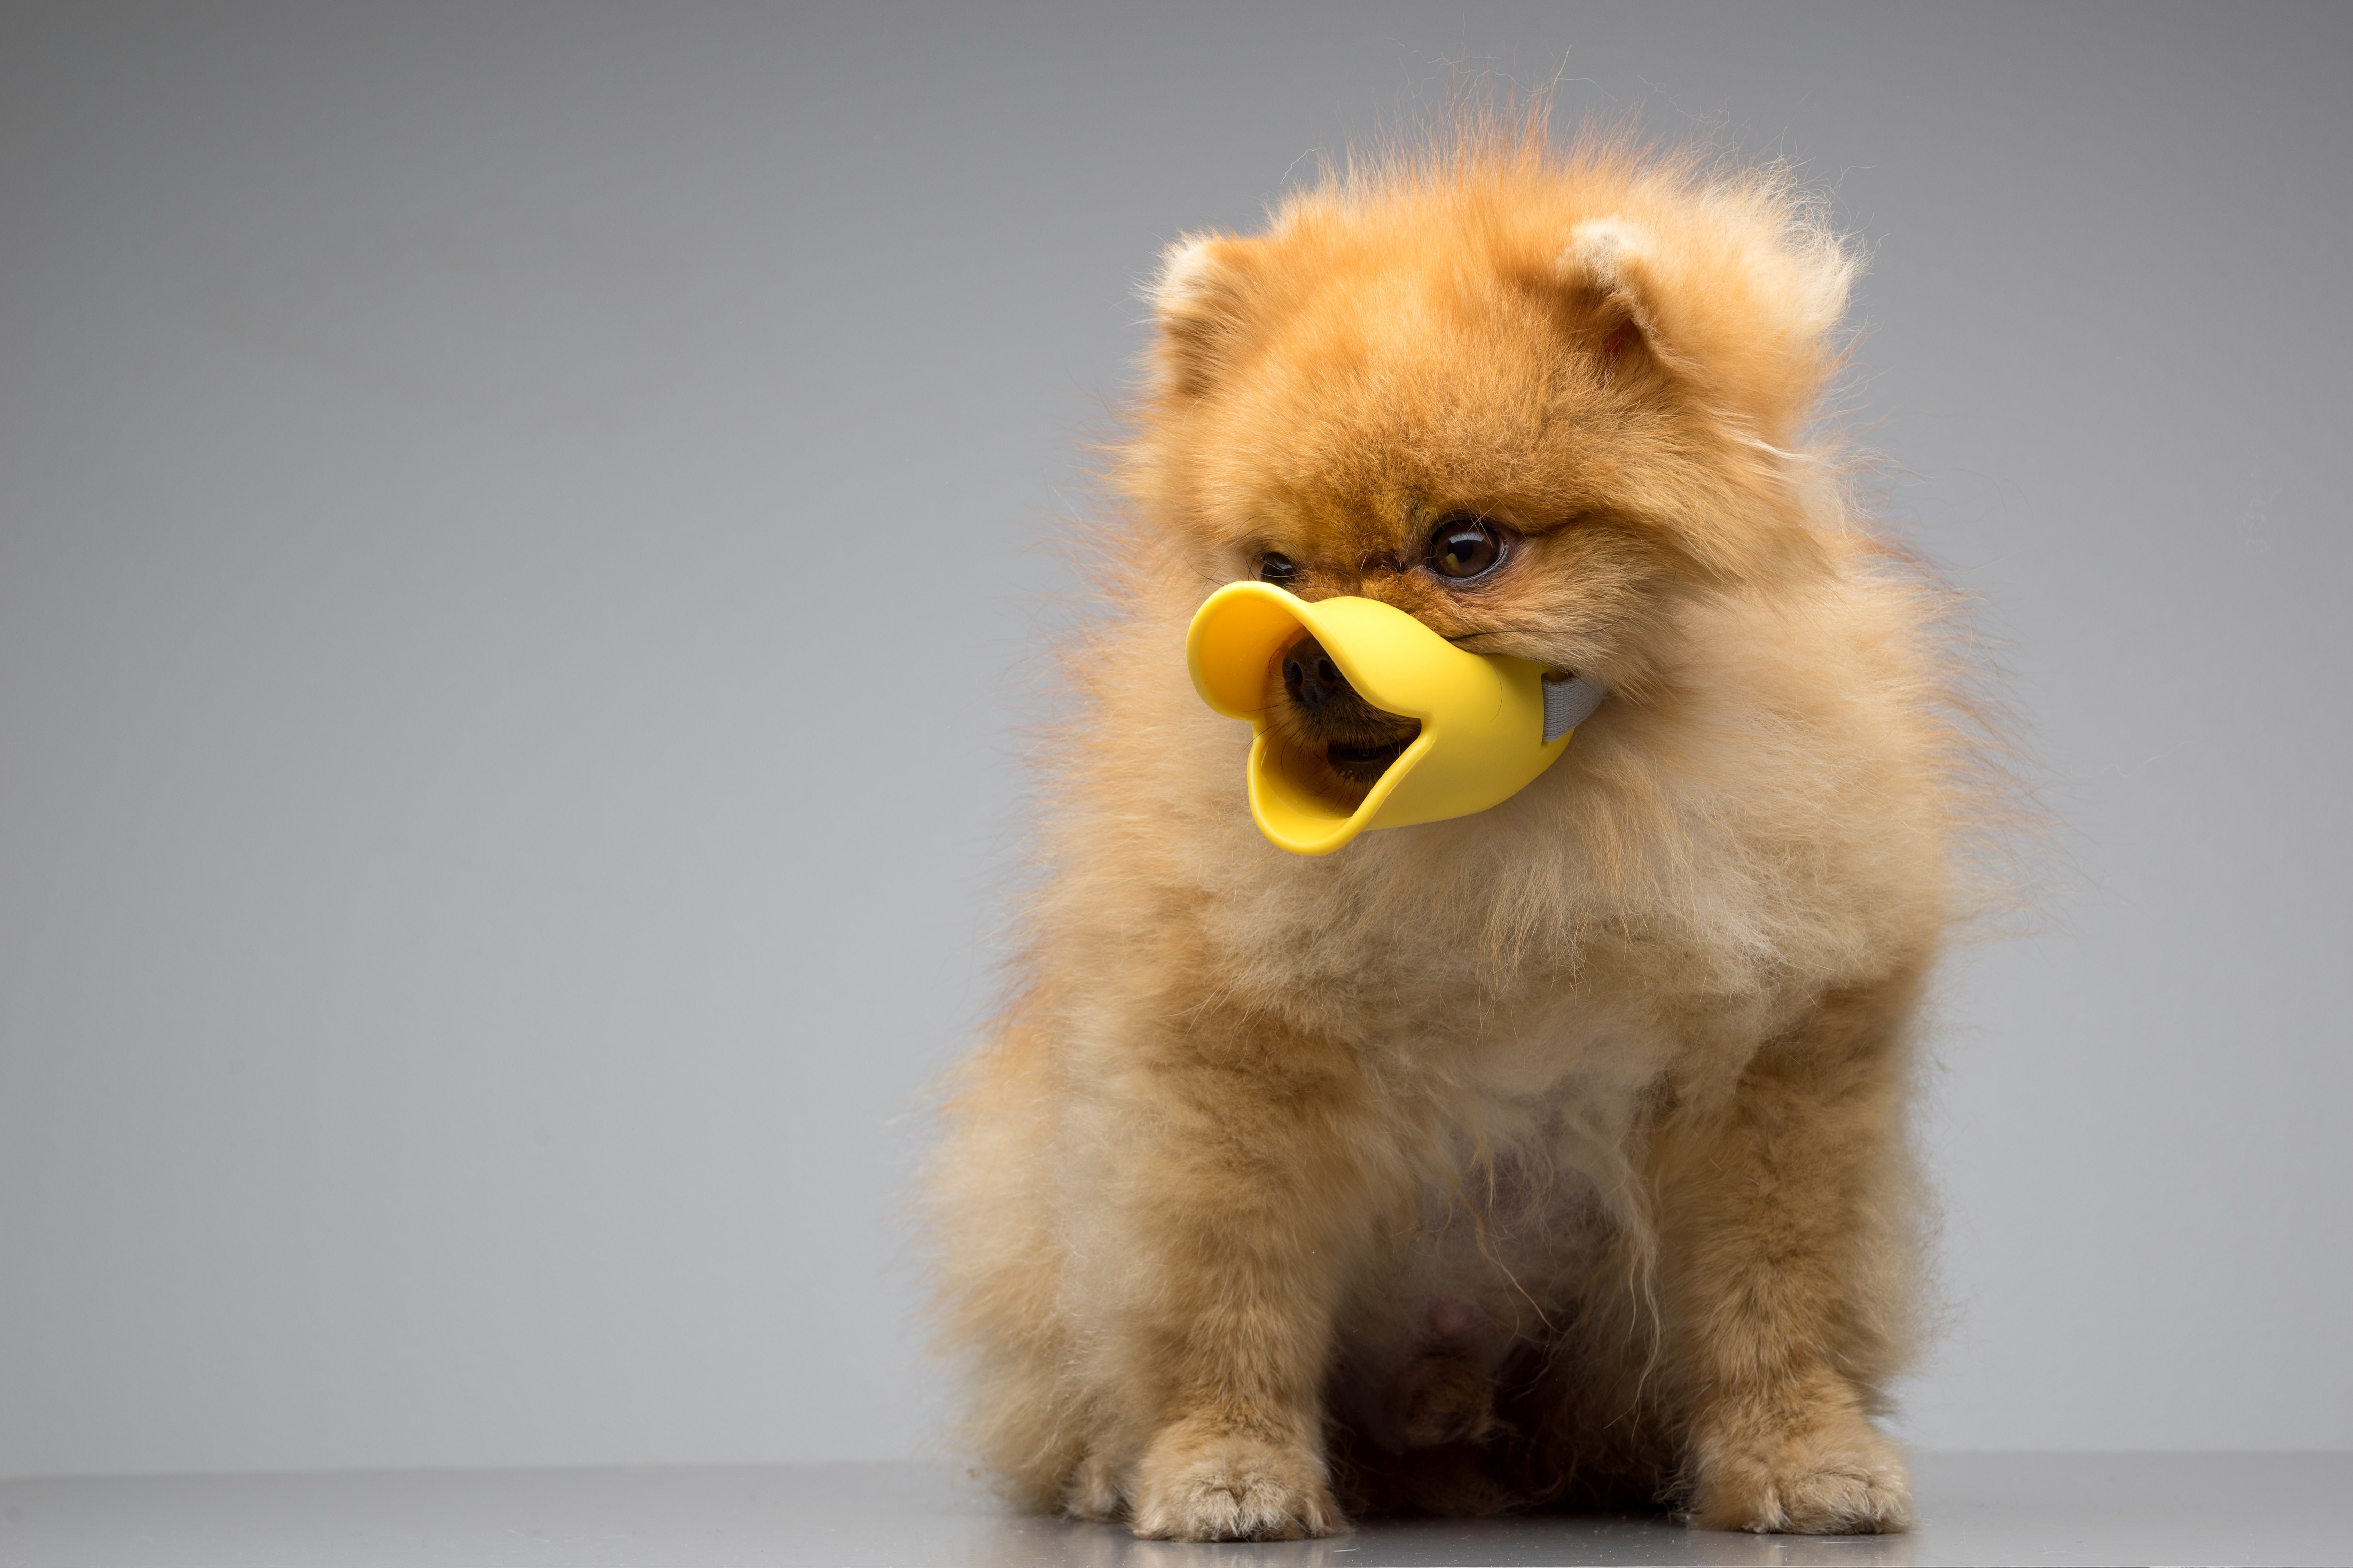 “A silicon duck muzzle for small dogs. This is what economists call a ‘win-win’”